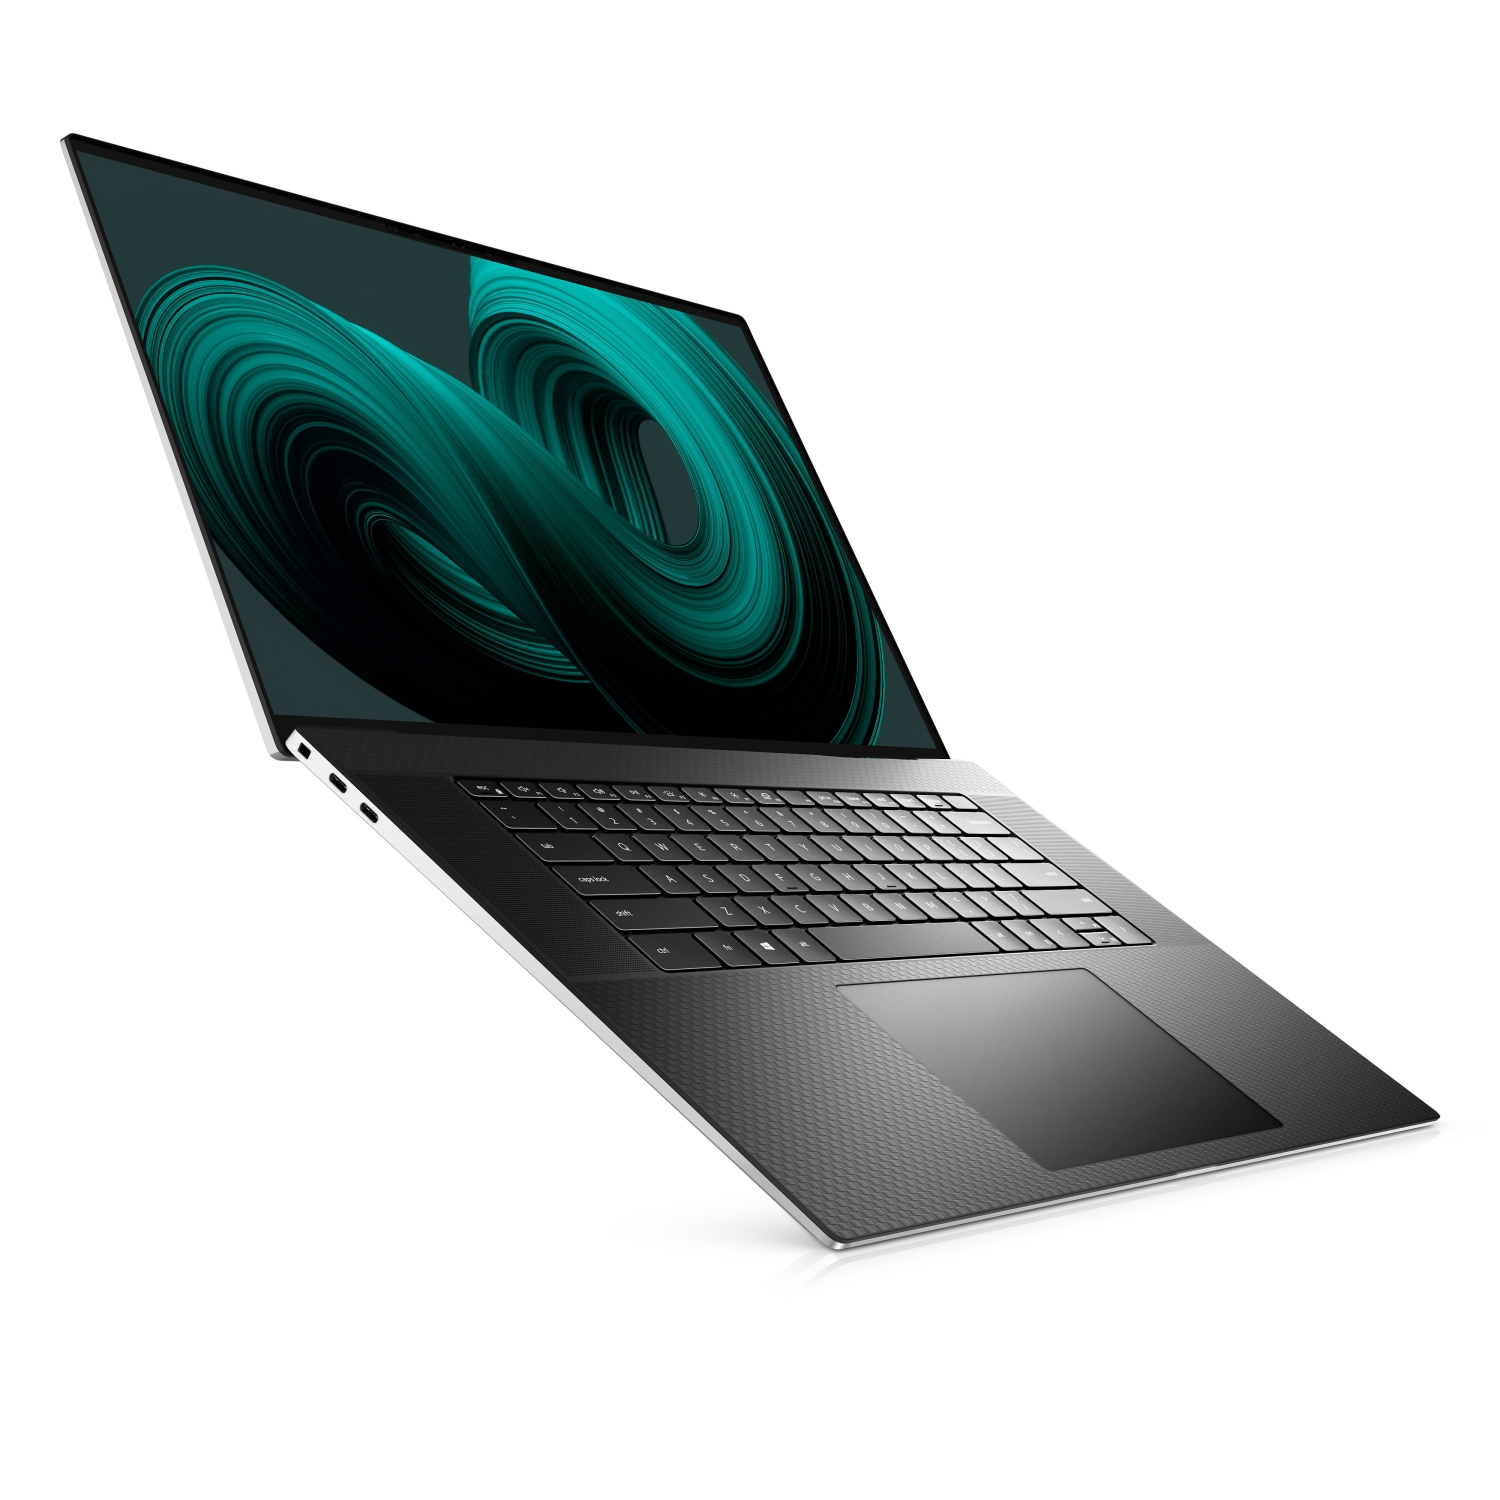 Refurbished (Excellent) - Dell XPS 17 9710 Laptop (2021) | 17" 4K Touch | Core i9 - 2TB SSD - 16GB RAM - RTX 3060 | 8 Cores @ 4.9 GHz - 11th Gen CPU Certified Refurbished